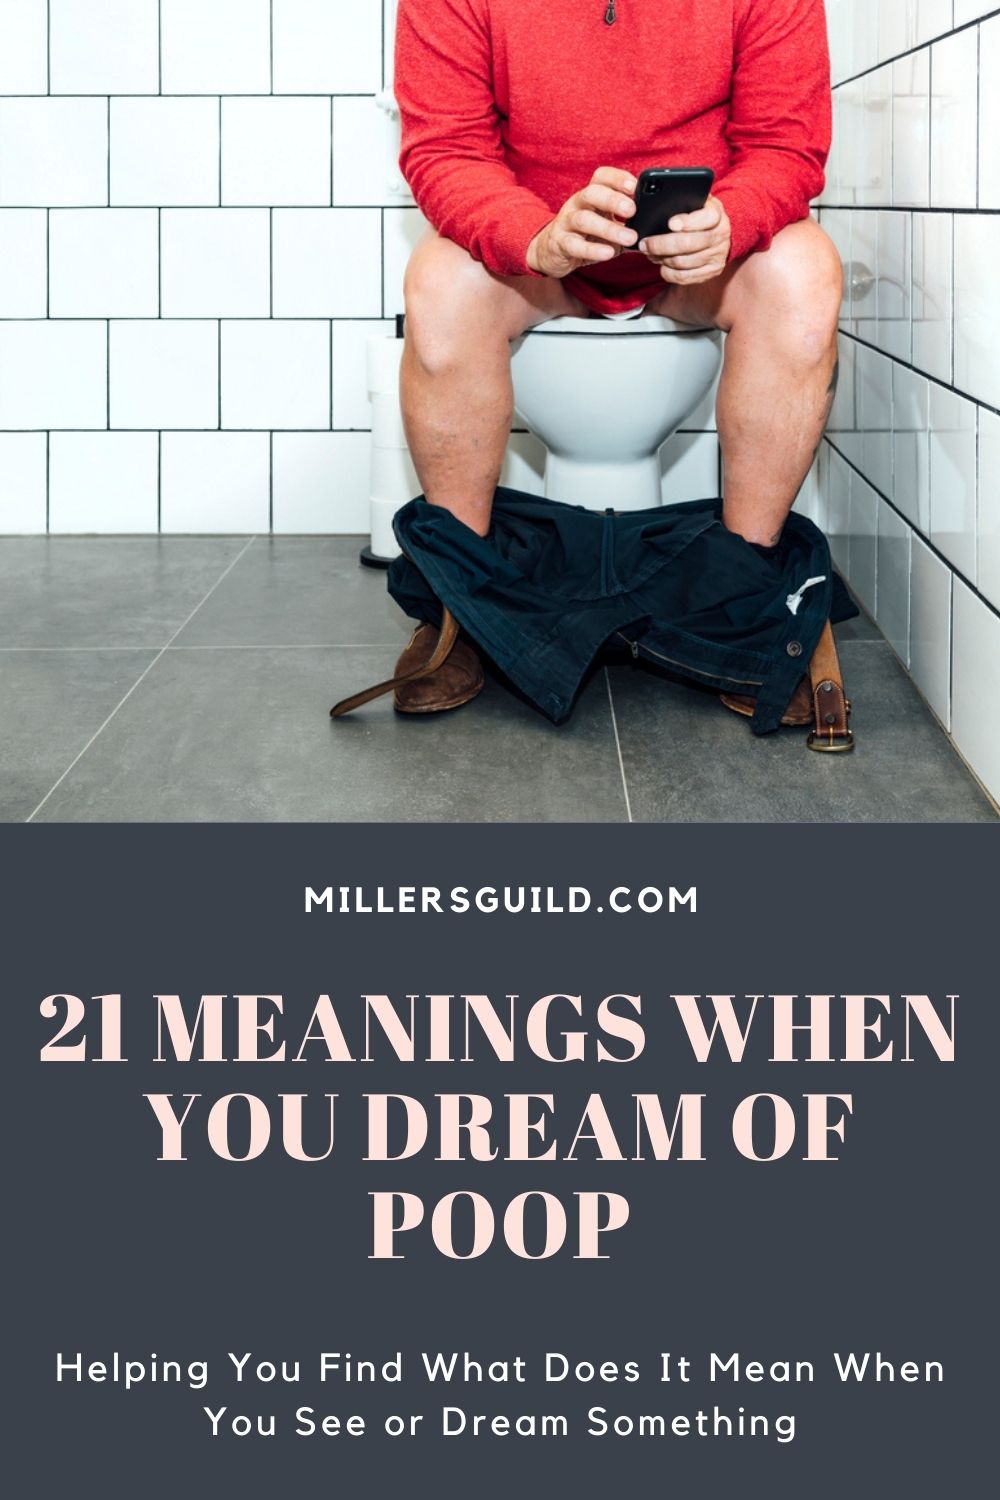 21 Meanings When You Dream of Poop 1